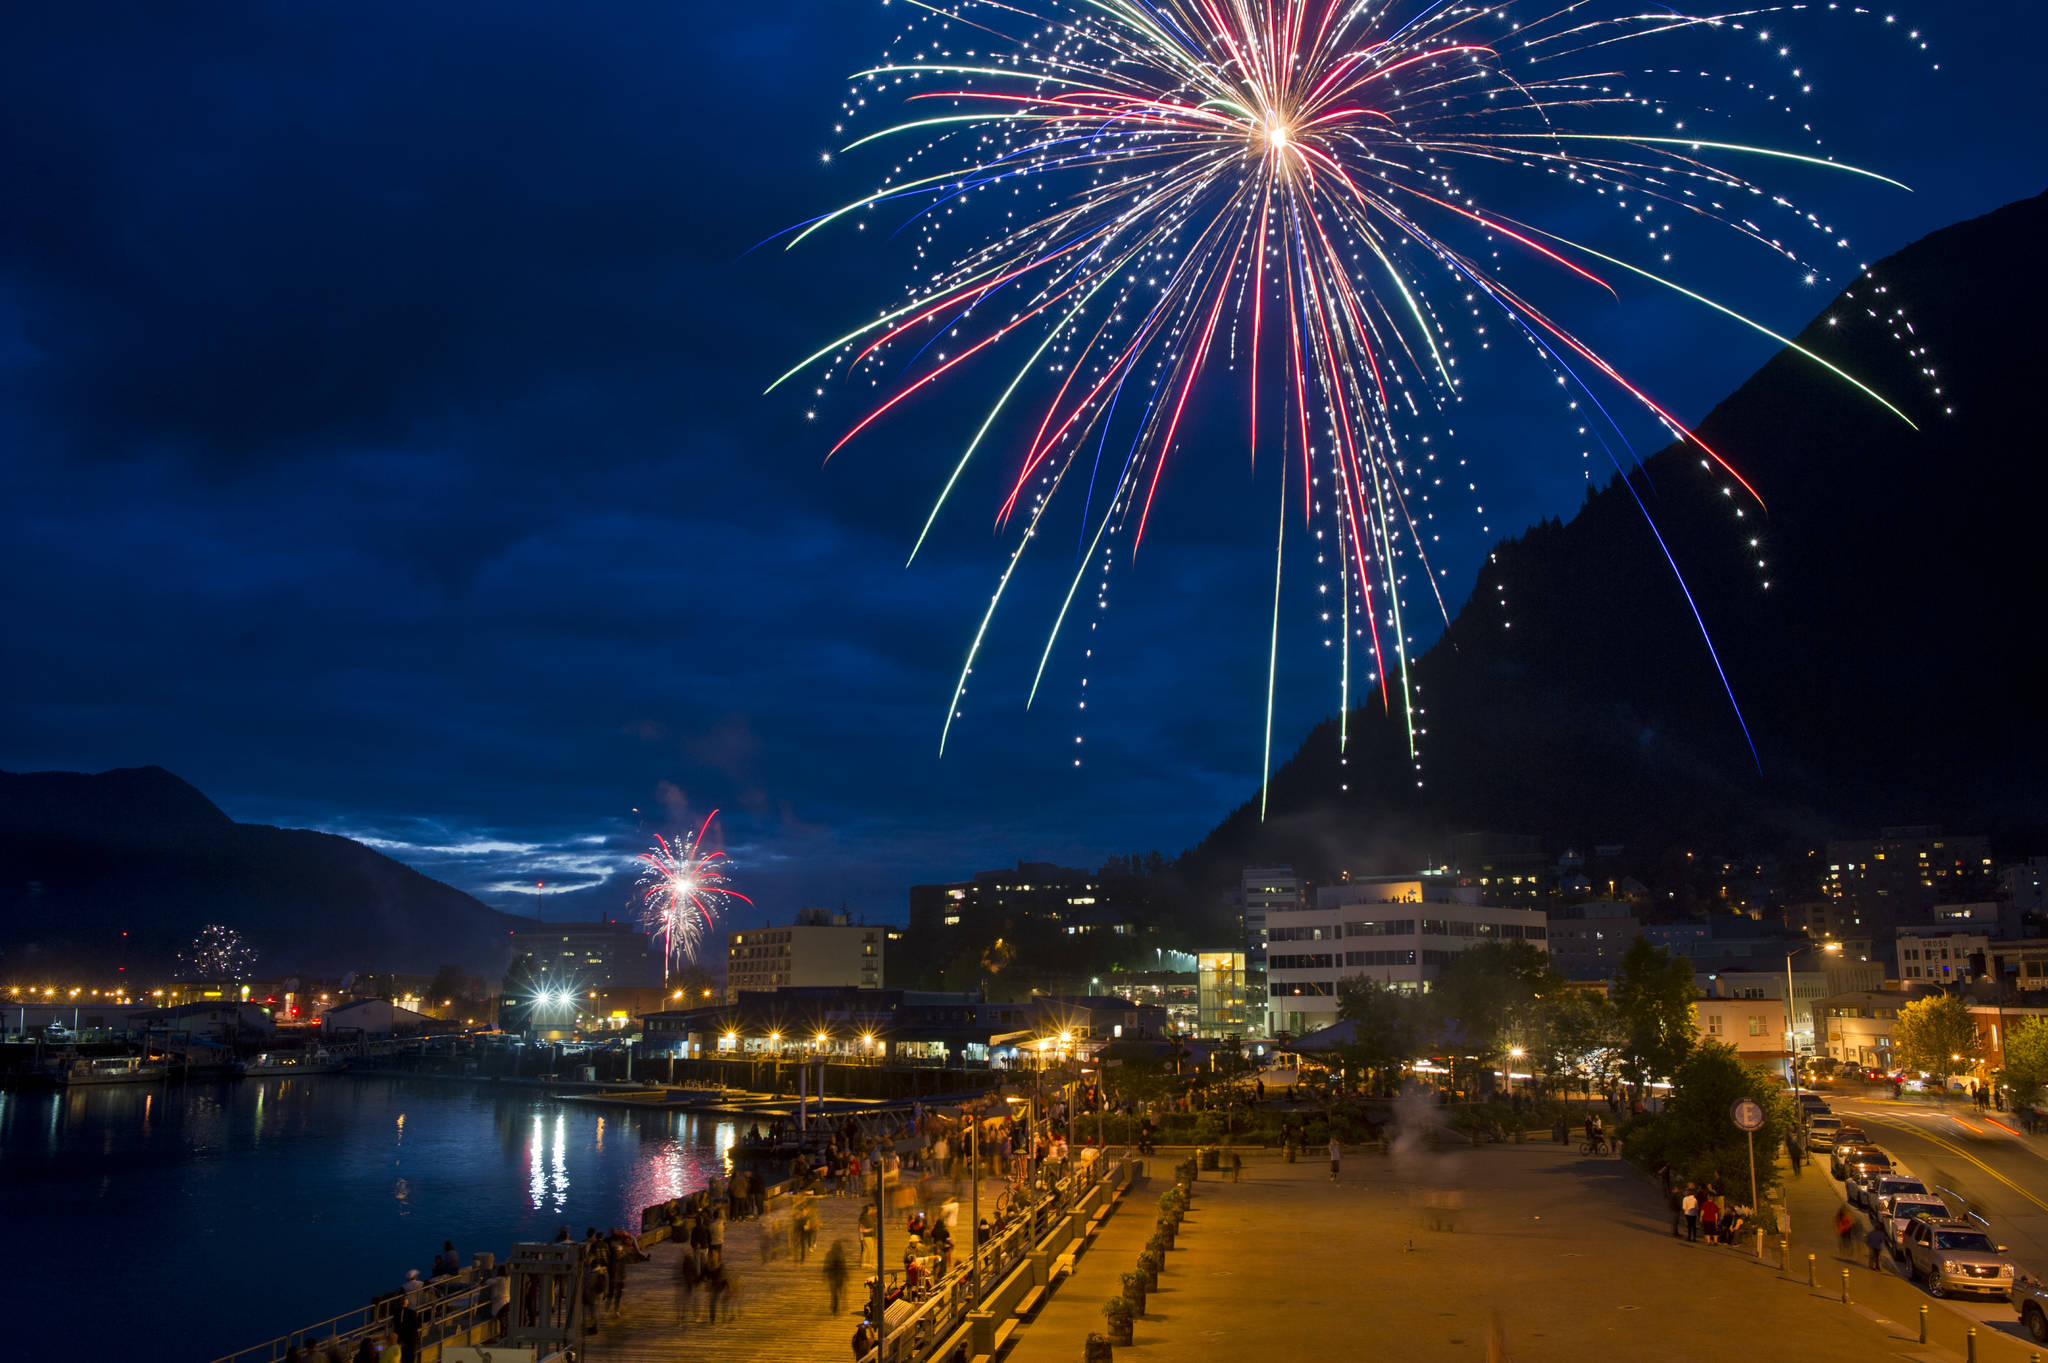 This file photo from July 4, 2016, shows the city’s Fourth of July fireworks display over Juneau. (Micheal Penn | Juneau Empire File)